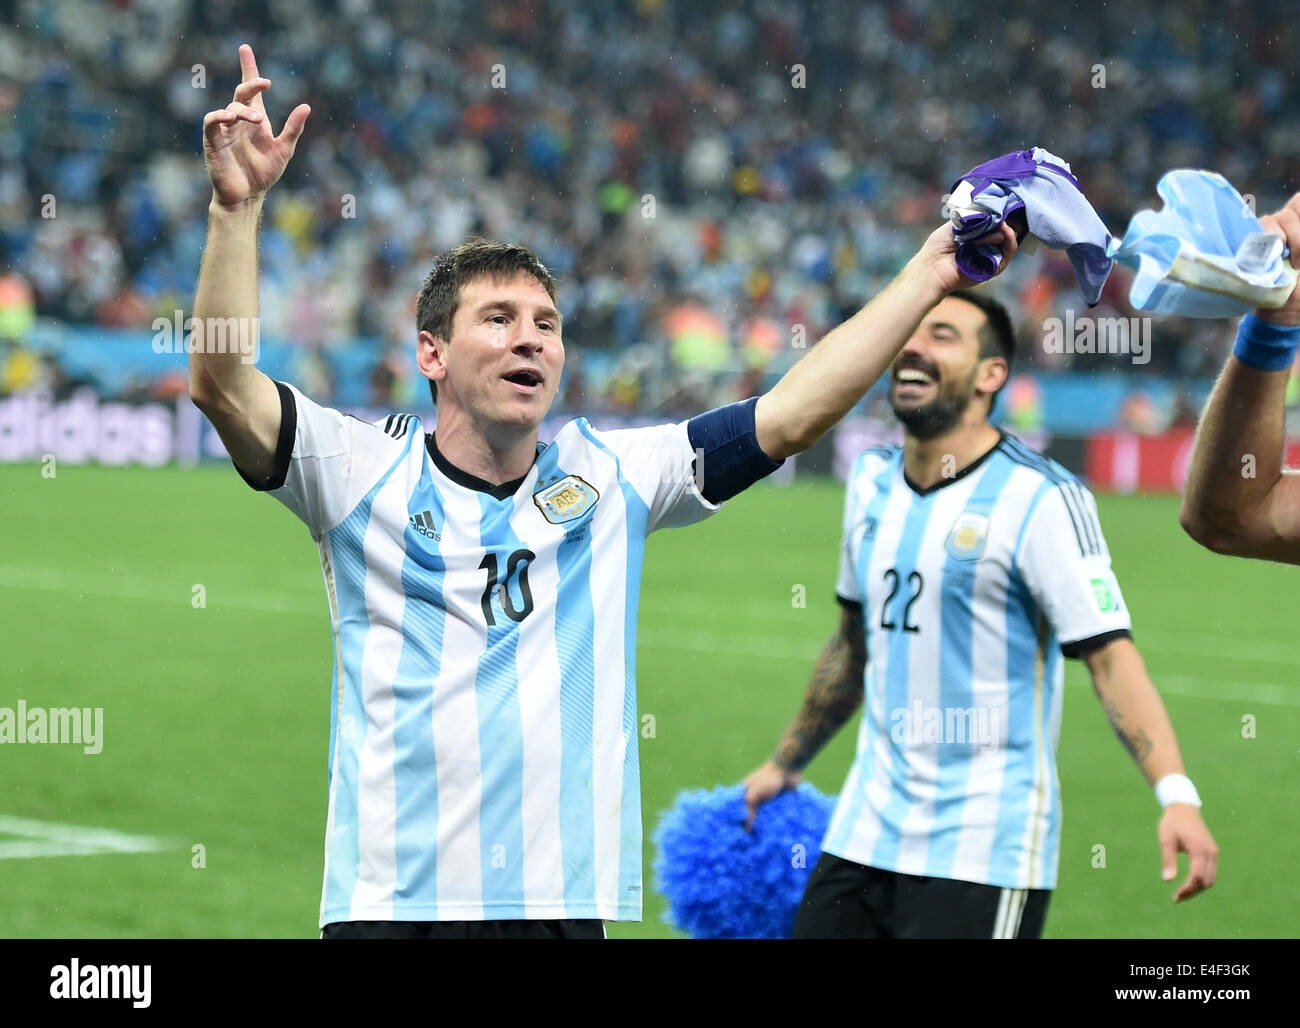 Sao Paulo, Brazil. 09th July, 2014. Argentina's Lionel Messi (L) and Ezequiel Lavezzi celebrate after winning the penalty shoot-out of the FIFA World Cup 2014 semi-final soccer match between the Netherlands and Argentina at the Arena Corinthians in Sao Paulo, Brazil, 09 July 2014. Photo: Marius Becker/dpa/Alamy Live News Stock Photo